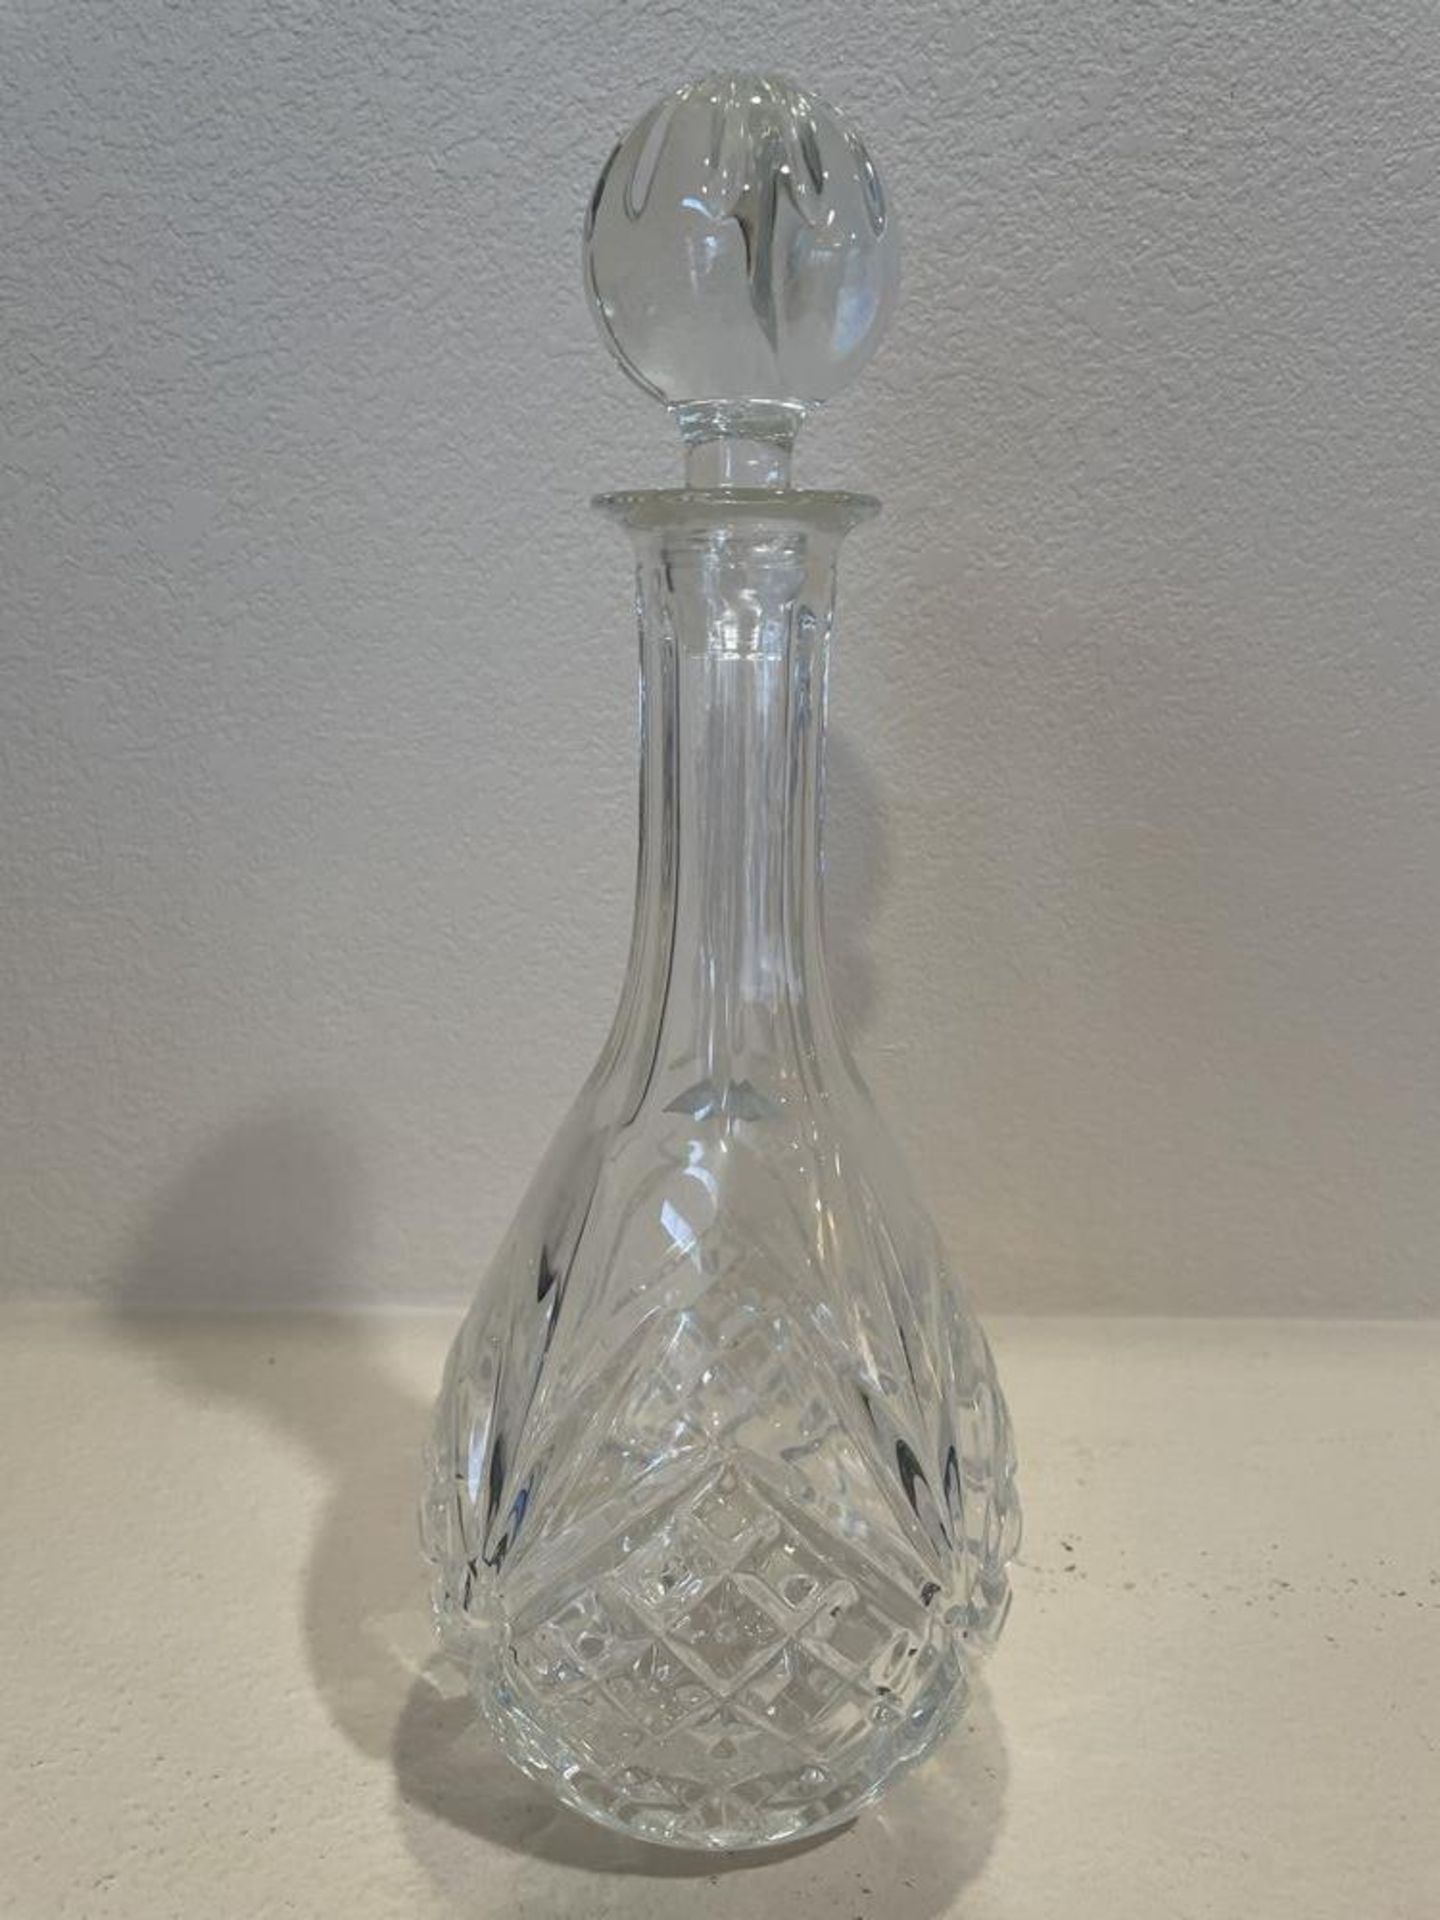 Shannon Crystal Wine Carafe with Lid, Made in Slovakia - 13 x 5" - Image 4 of 8